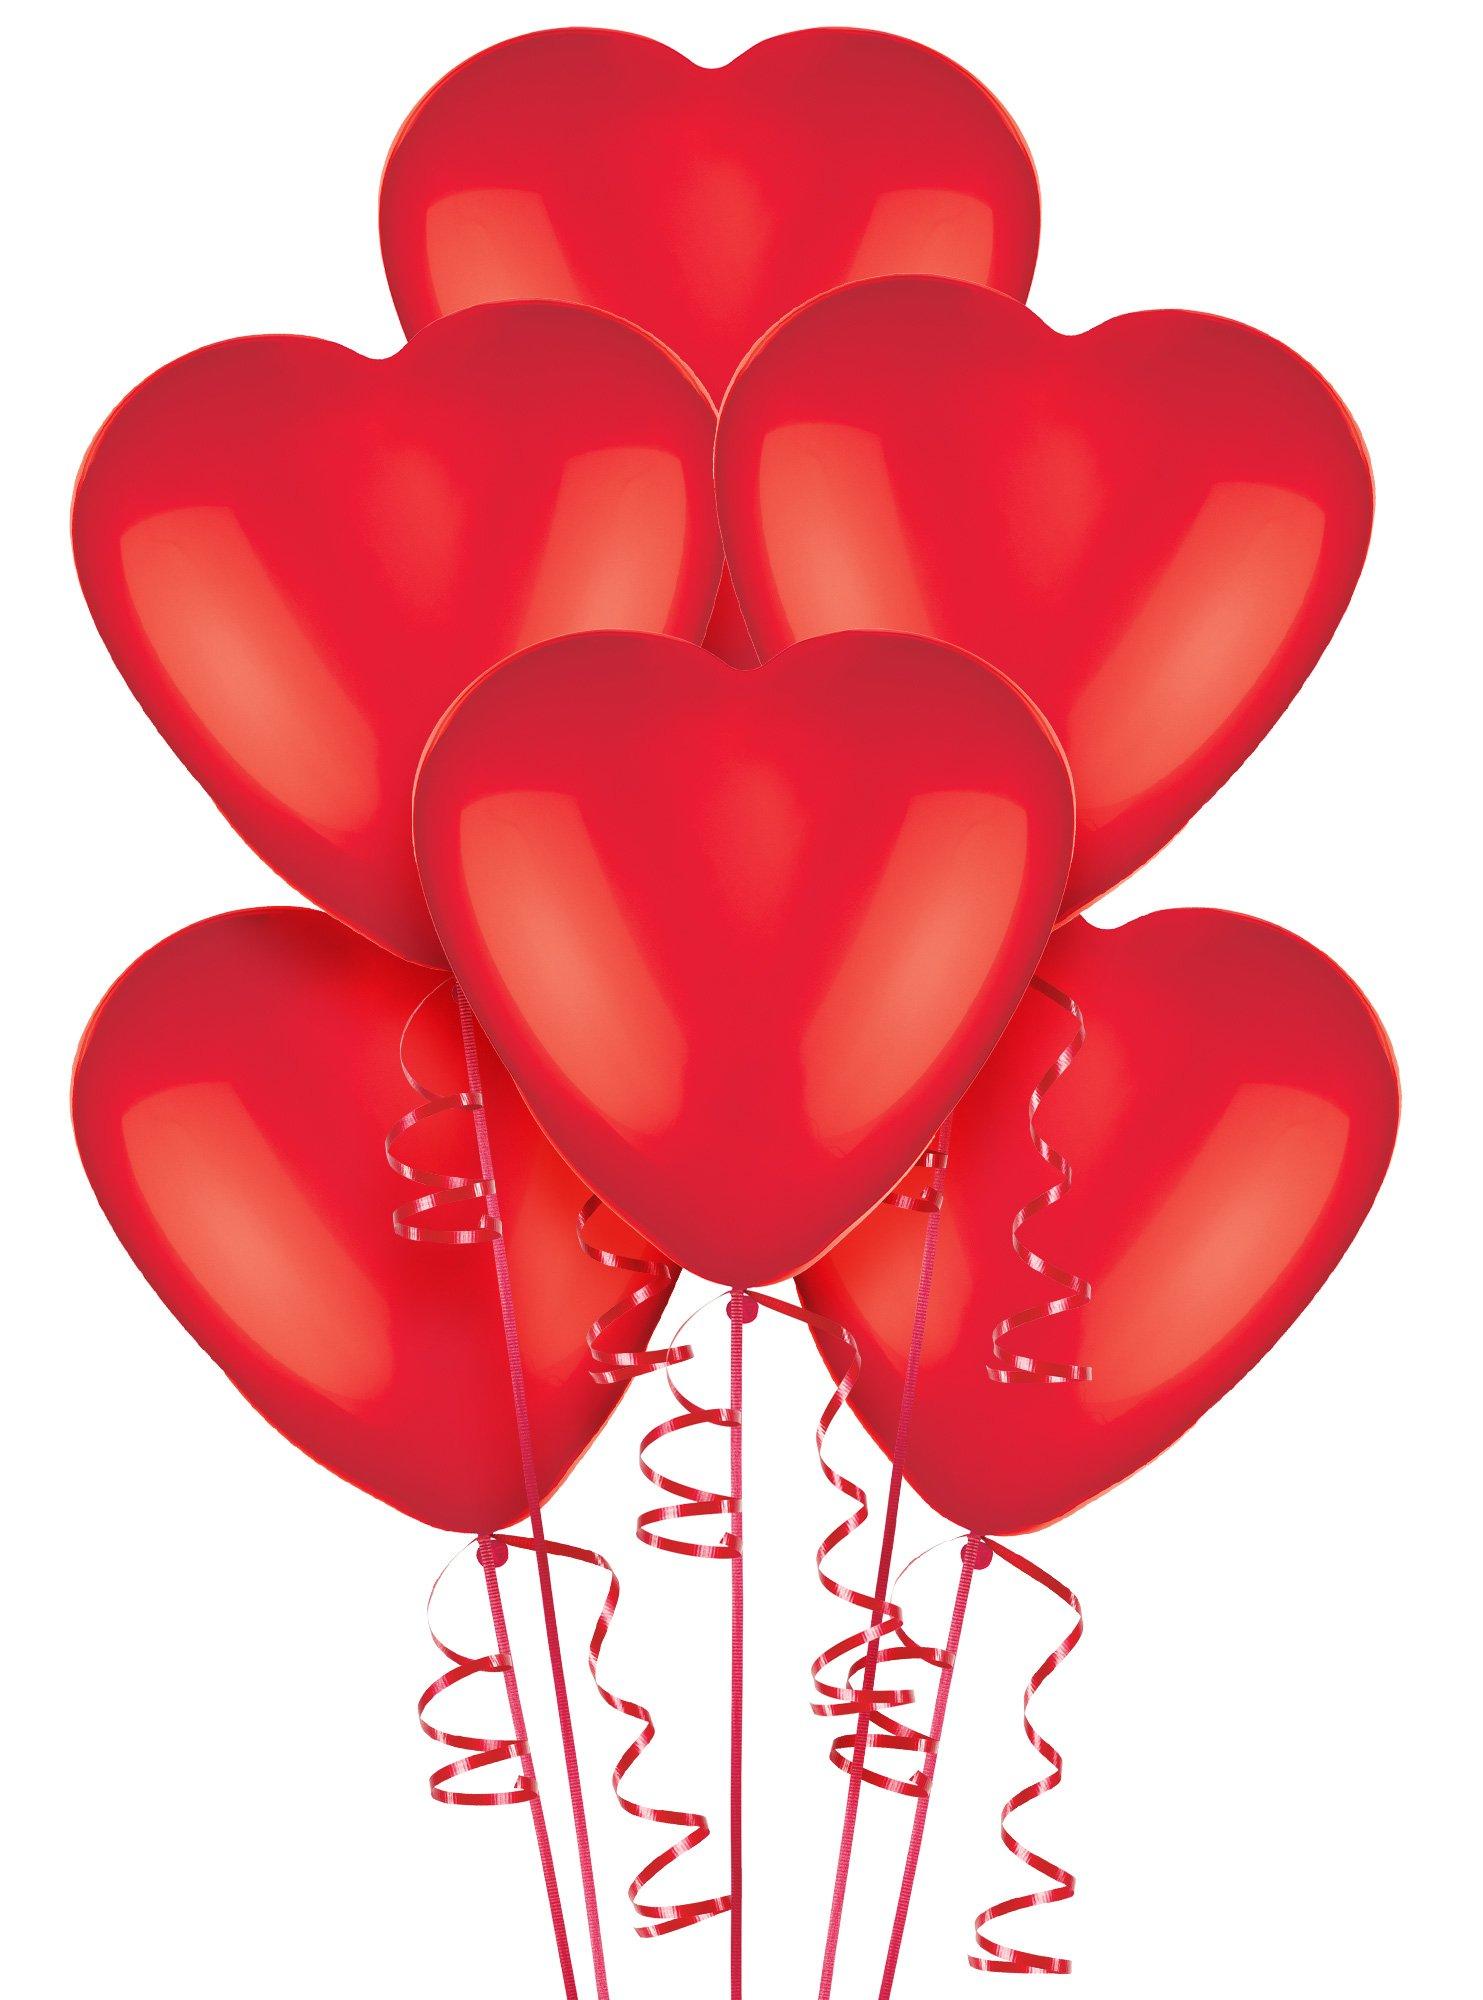 Amscan Valentines Day Bright Red Heart‐Shaped Latex Balloon Decoration, Red, 12, 6 Pack